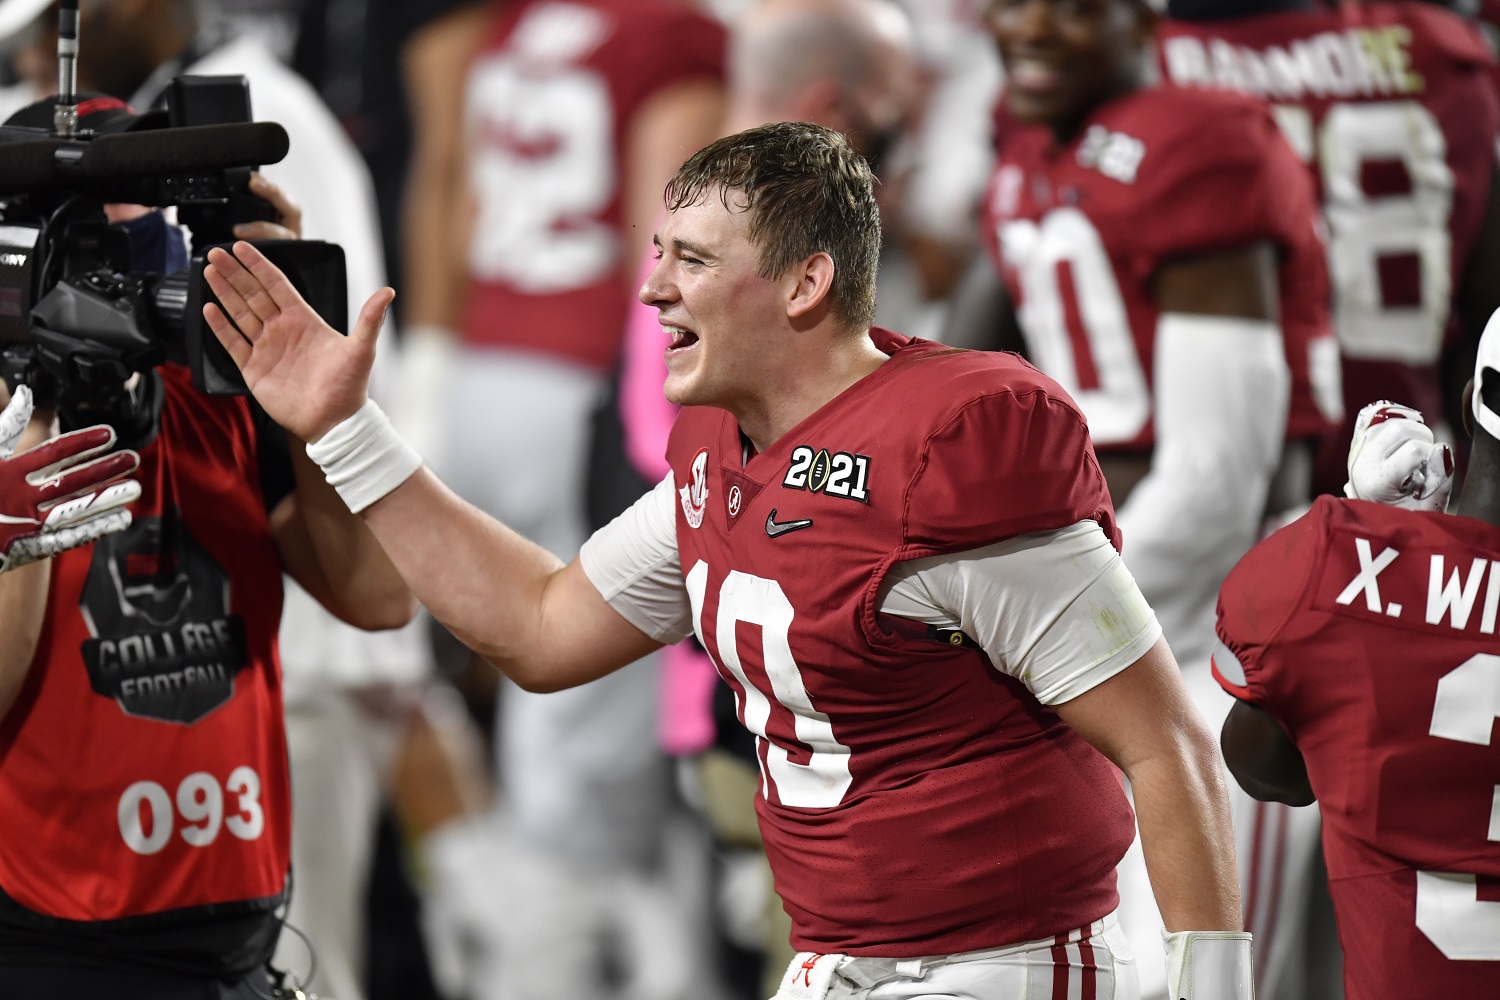 Alabama quarterback Mac Jones is under scrutiny two weeks before the 2021 NFL draft over an old photo on social media.